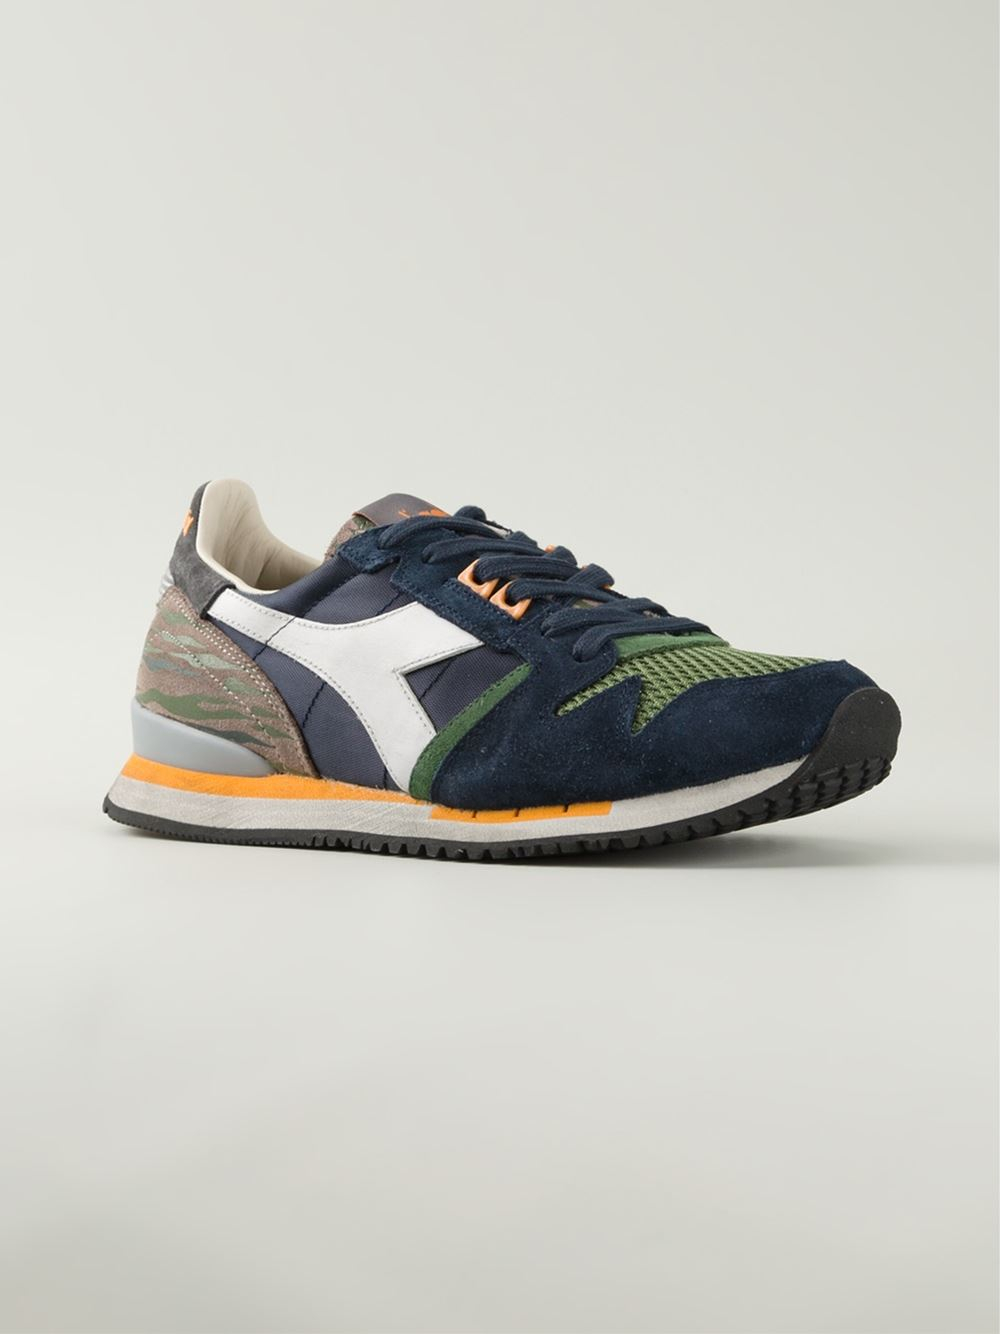 Diadora Lace Up Retro Sneakers in Green for Men - Lyst